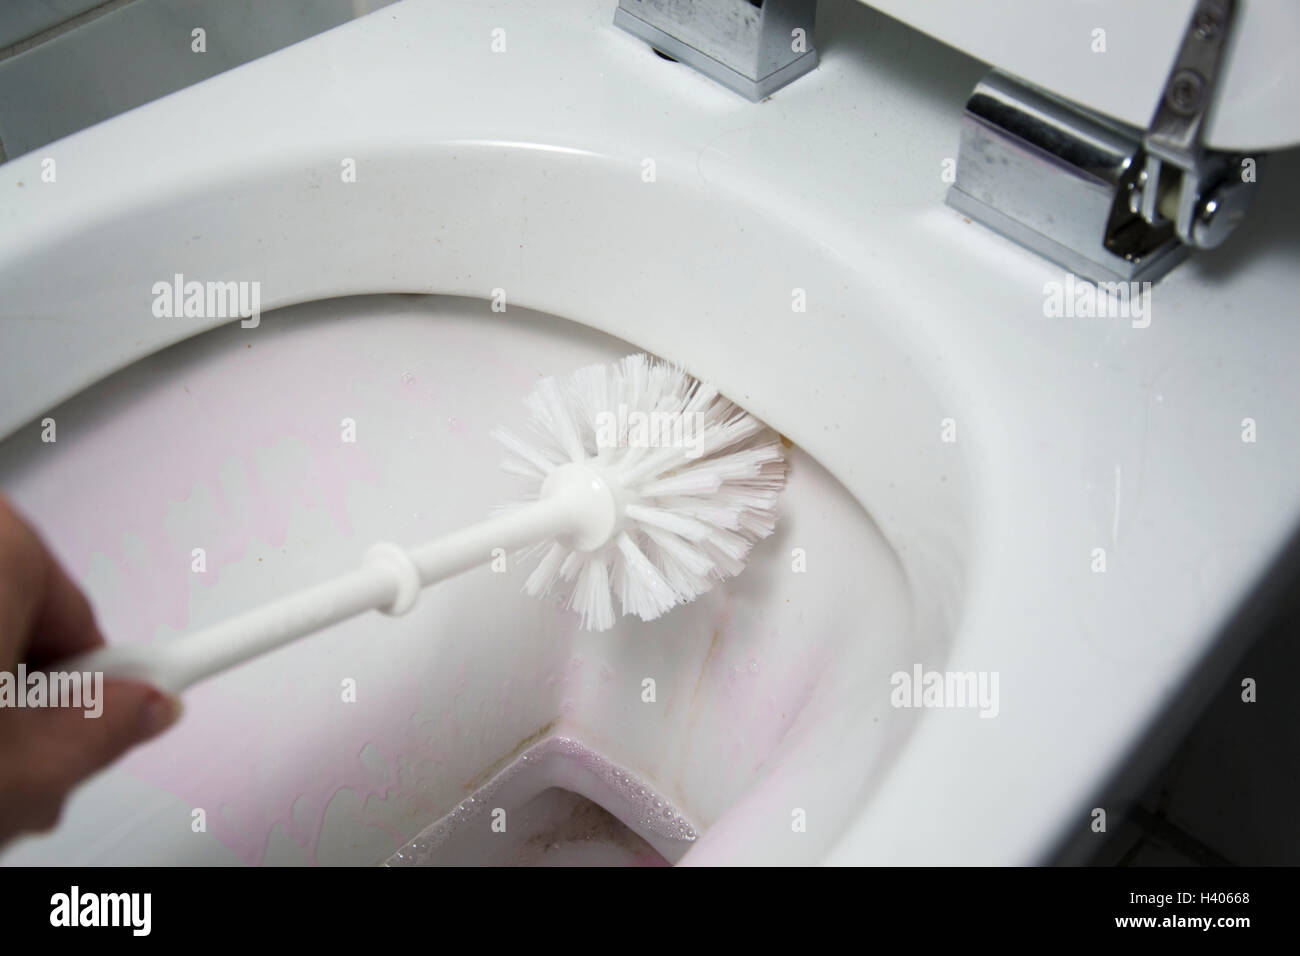 A woman cleans a bathroom toilet with a scrub brush Stock Photo